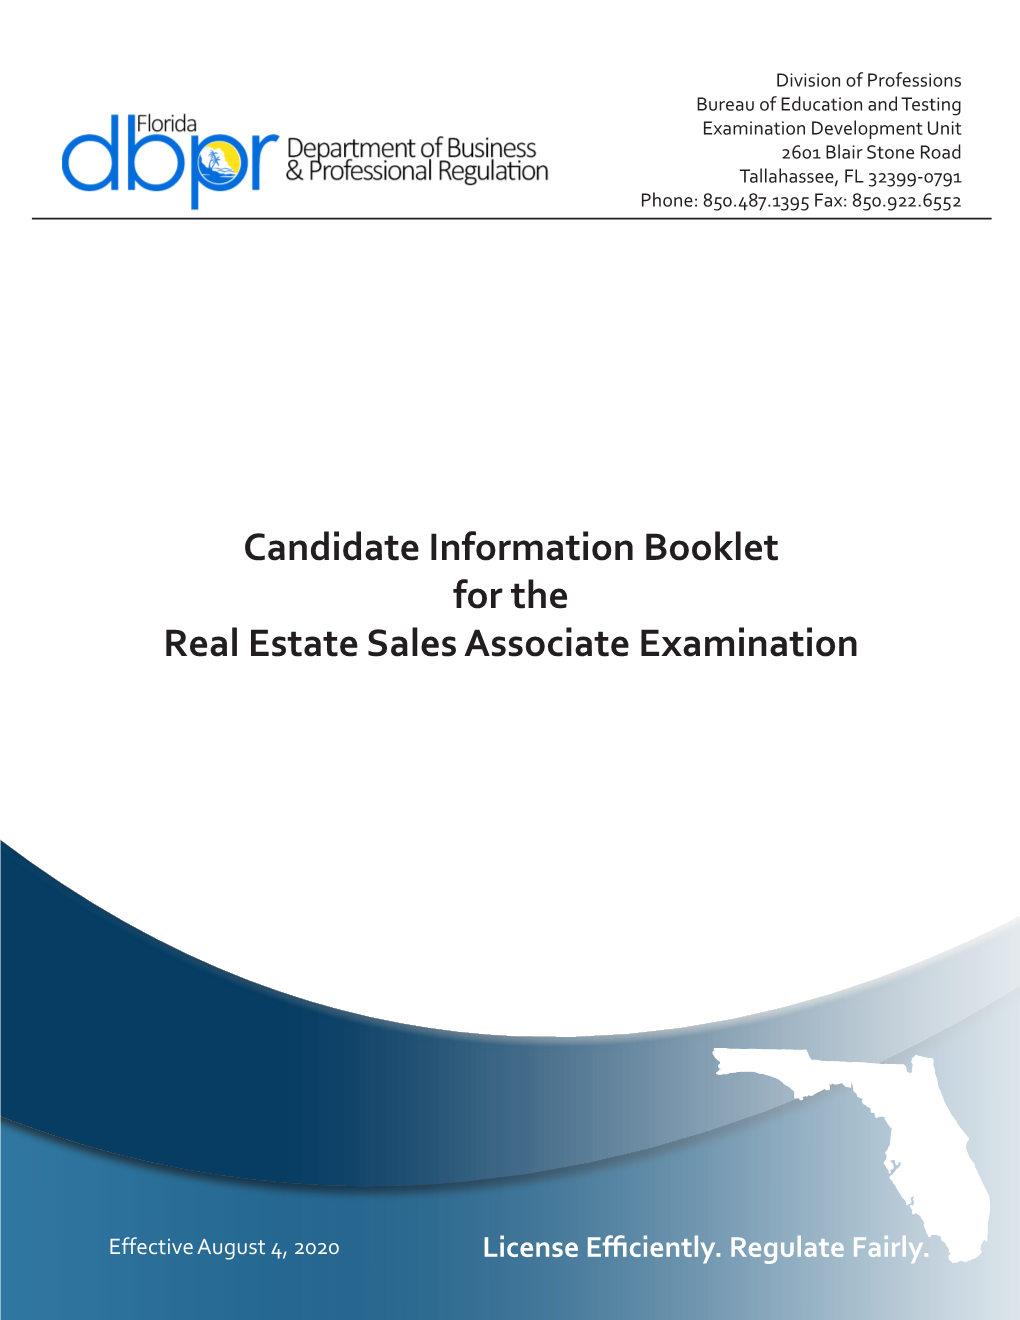 Candidate Information Booklet for the Real Estate Sales Associate Examination